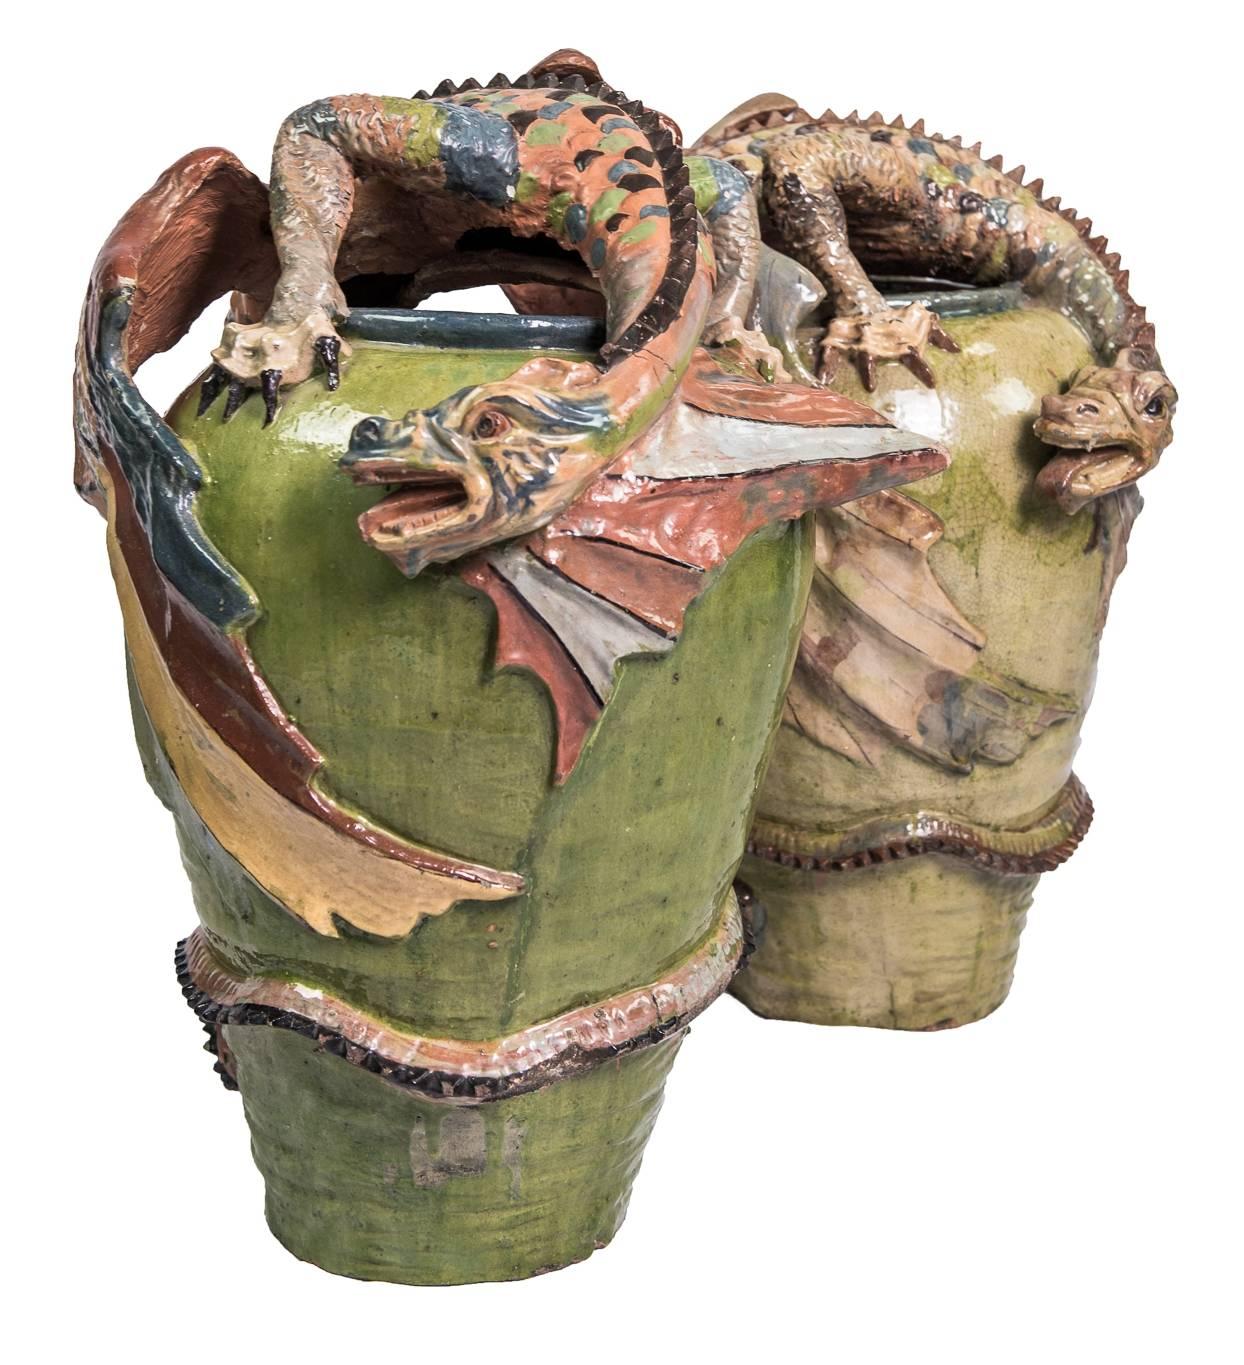 Glazed terracotta jars with dragons climbing on them in the same material. Celedon color jars and the integrated dragons are decorated in muted colors. Tonalá has been known for centuries as producing unusual and artistic pottery in clay and